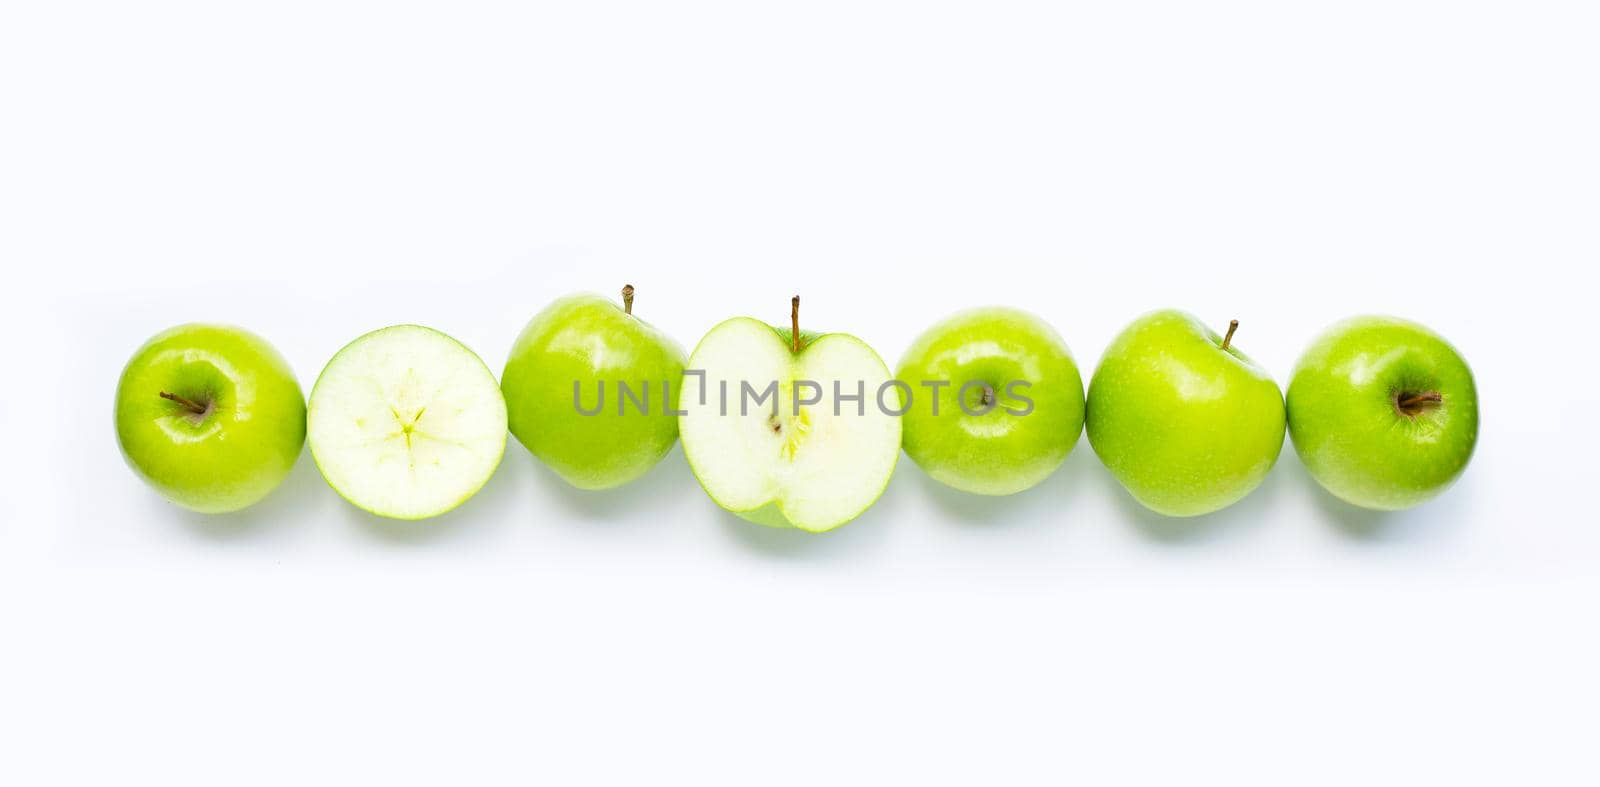 Green apples on white background. Copy space